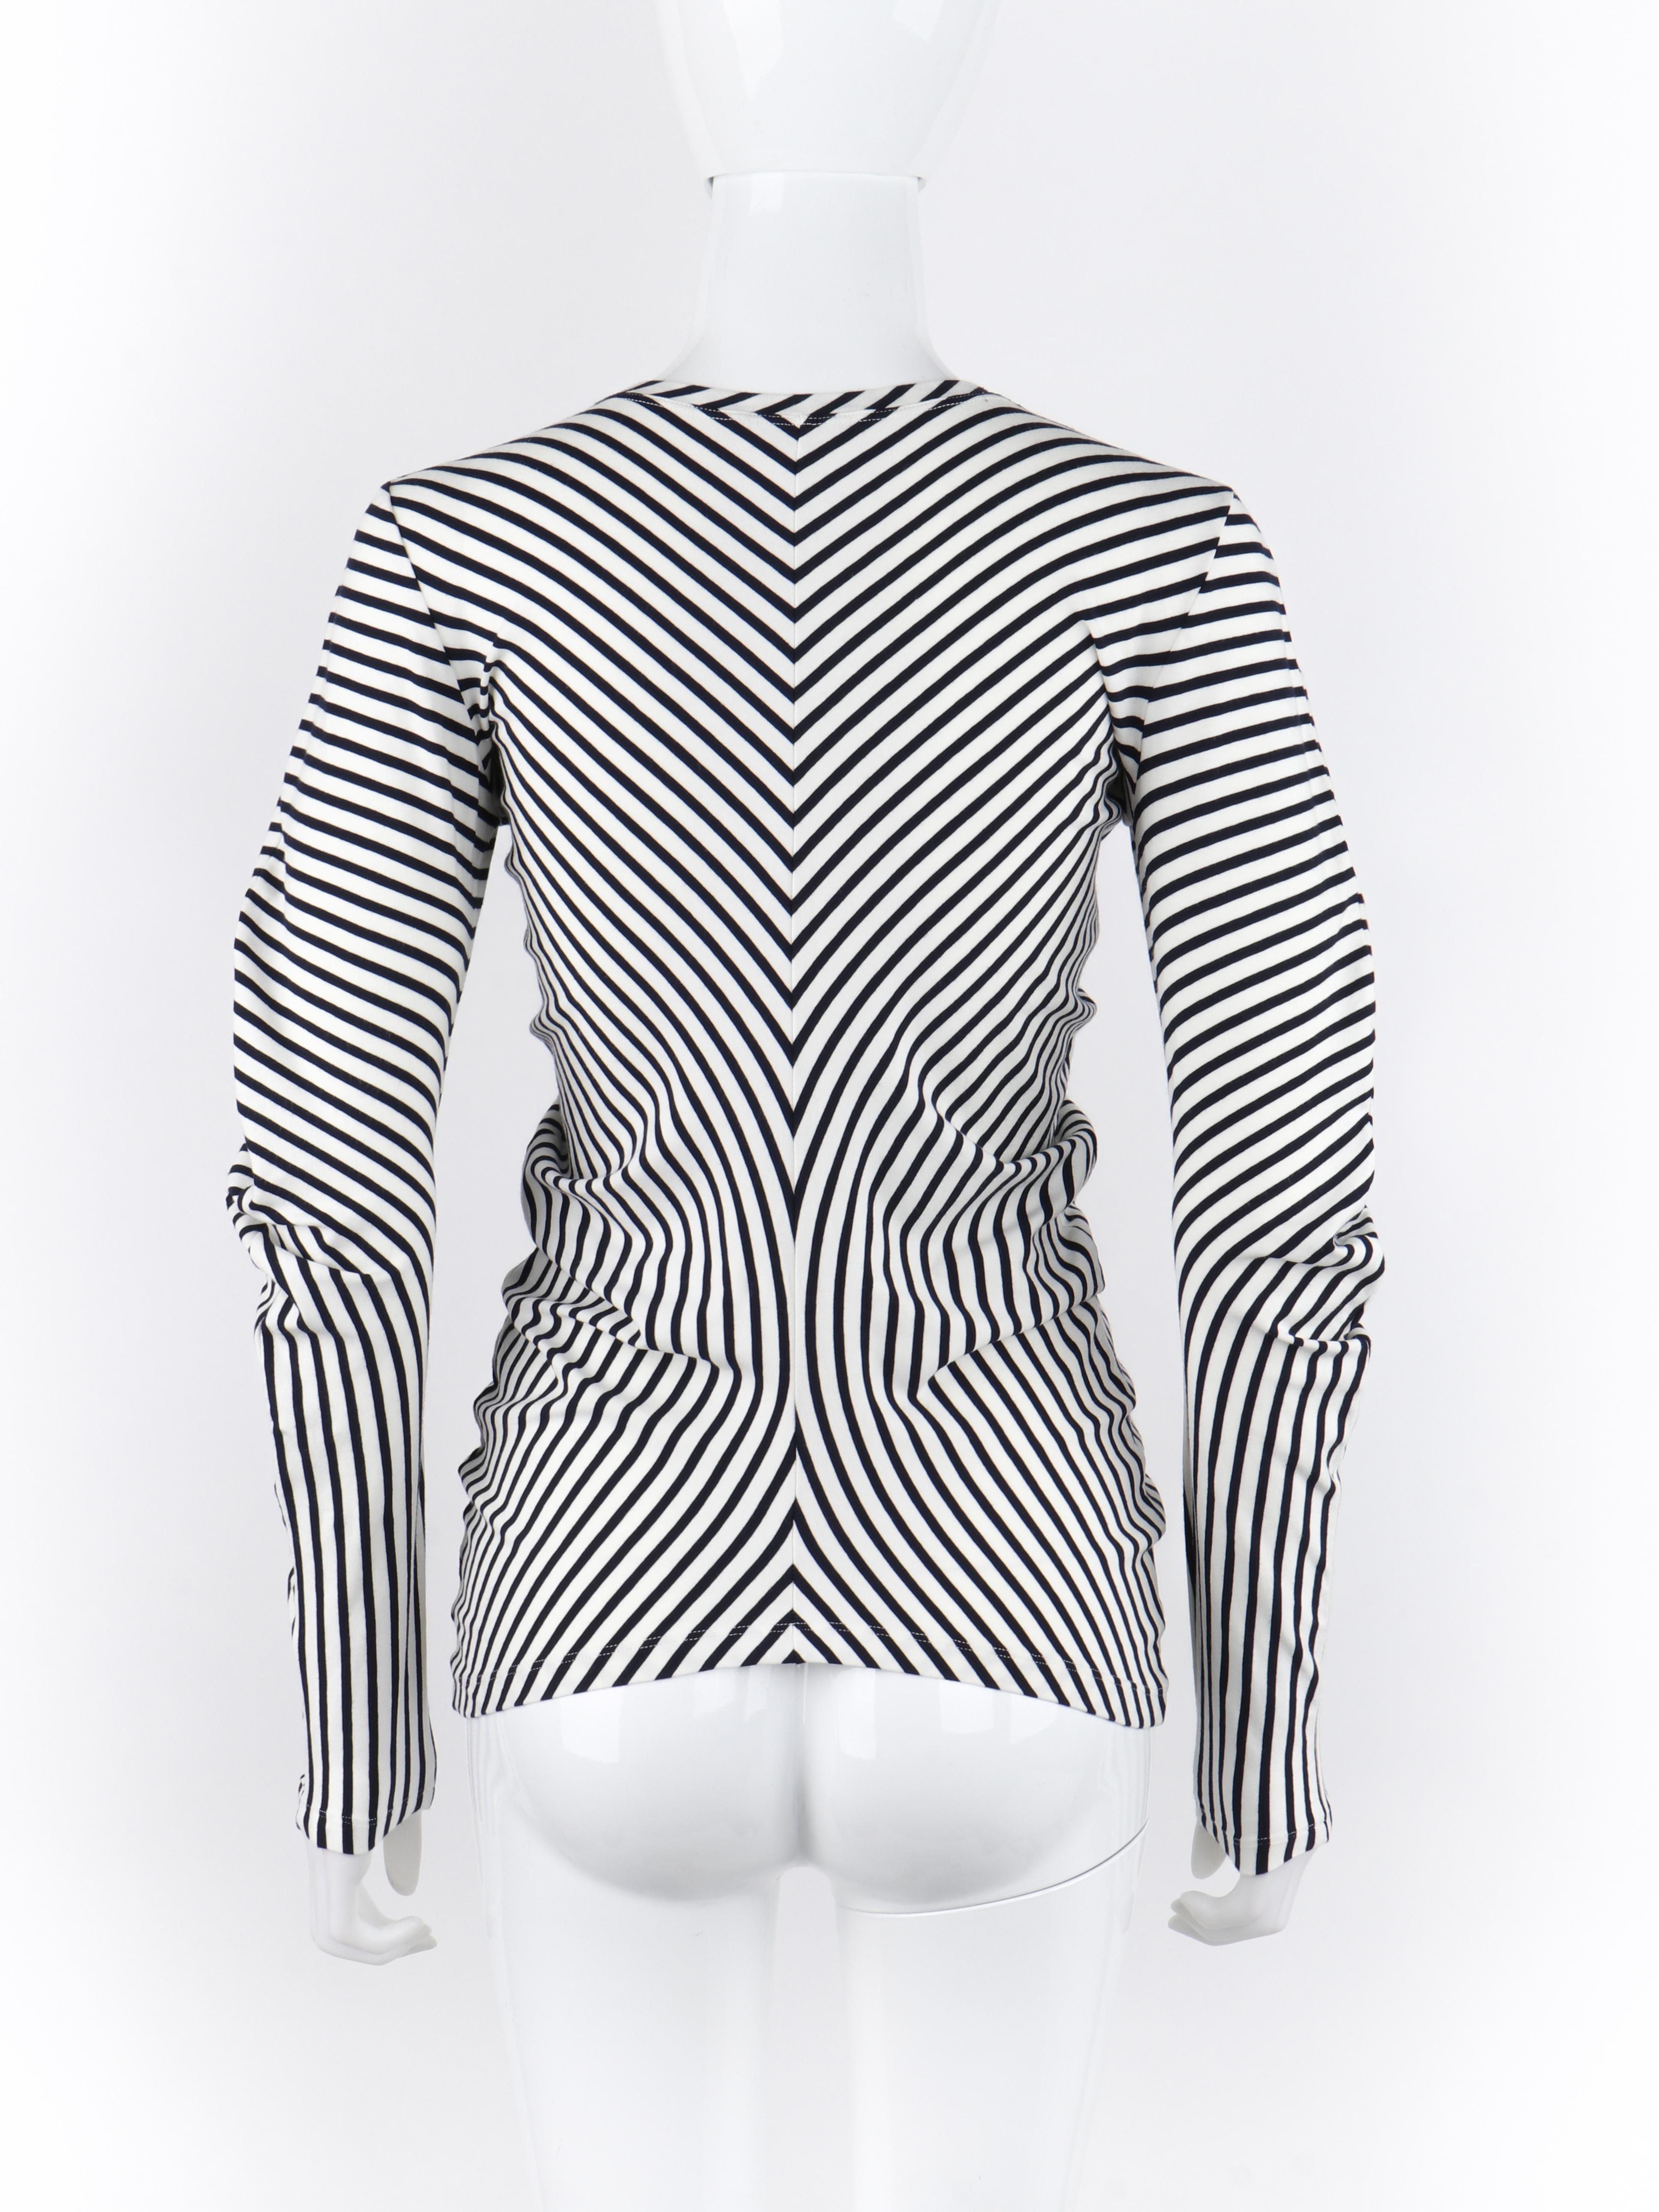 ALEXANDER McQUEEN S/S 2006 Blue White Stripe Knit Curve Long Sleeve Draped Top For Sale 1